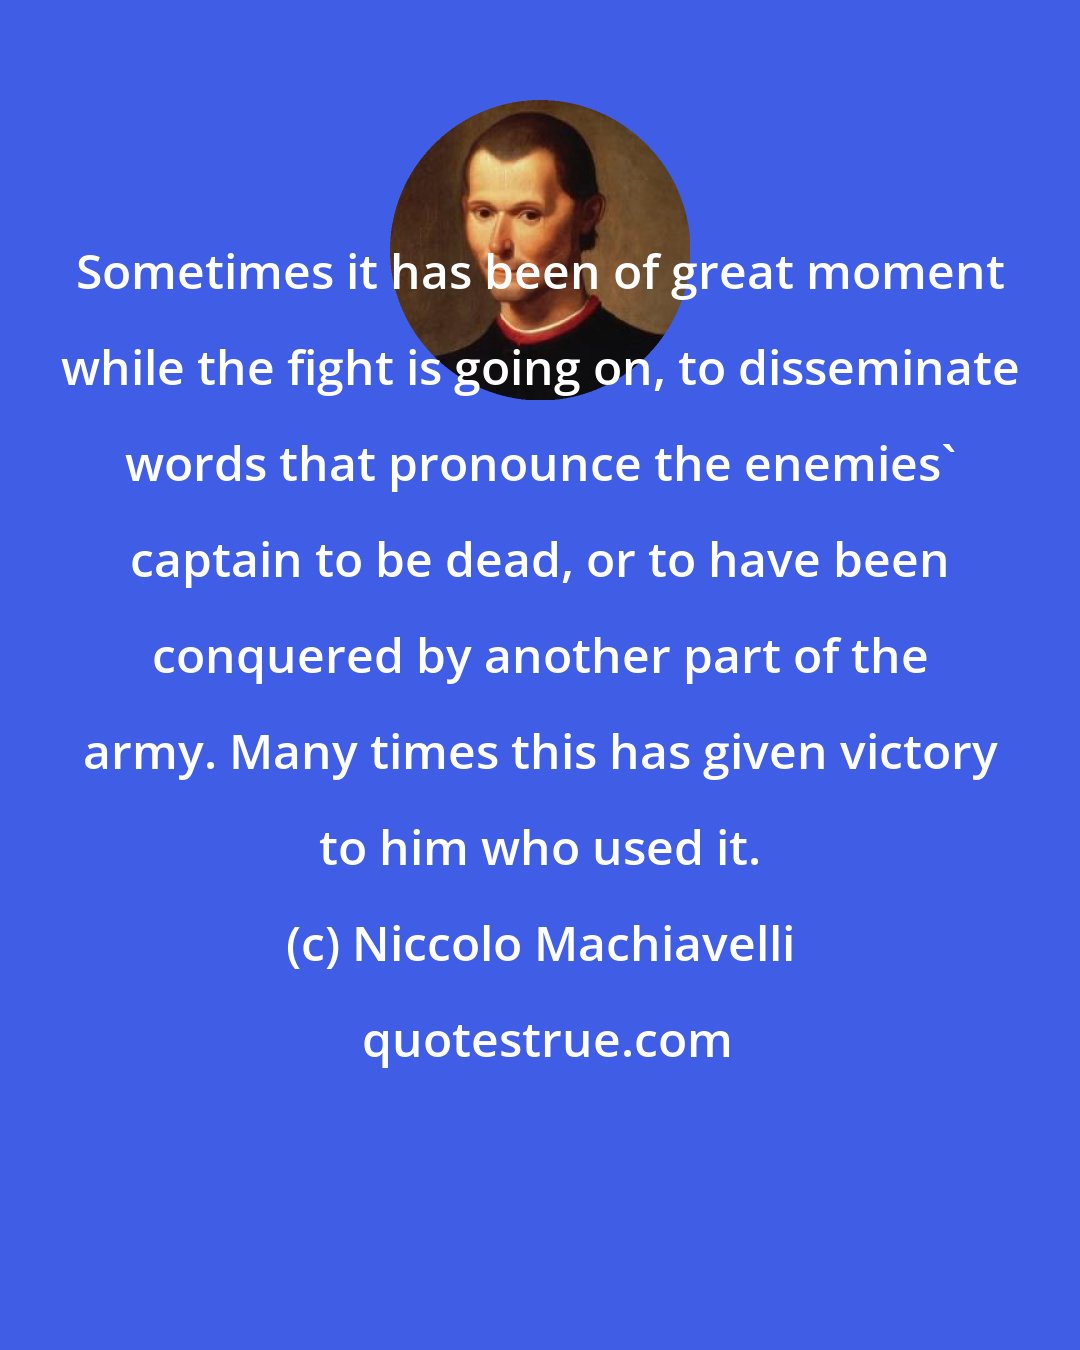 Niccolo Machiavelli: Sometimes it has been of great moment while the fight is going on, to disseminate words that pronounce the enemies' captain to be dead, or to have been conquered by another part of the army. Many times this has given victory to him who used it.